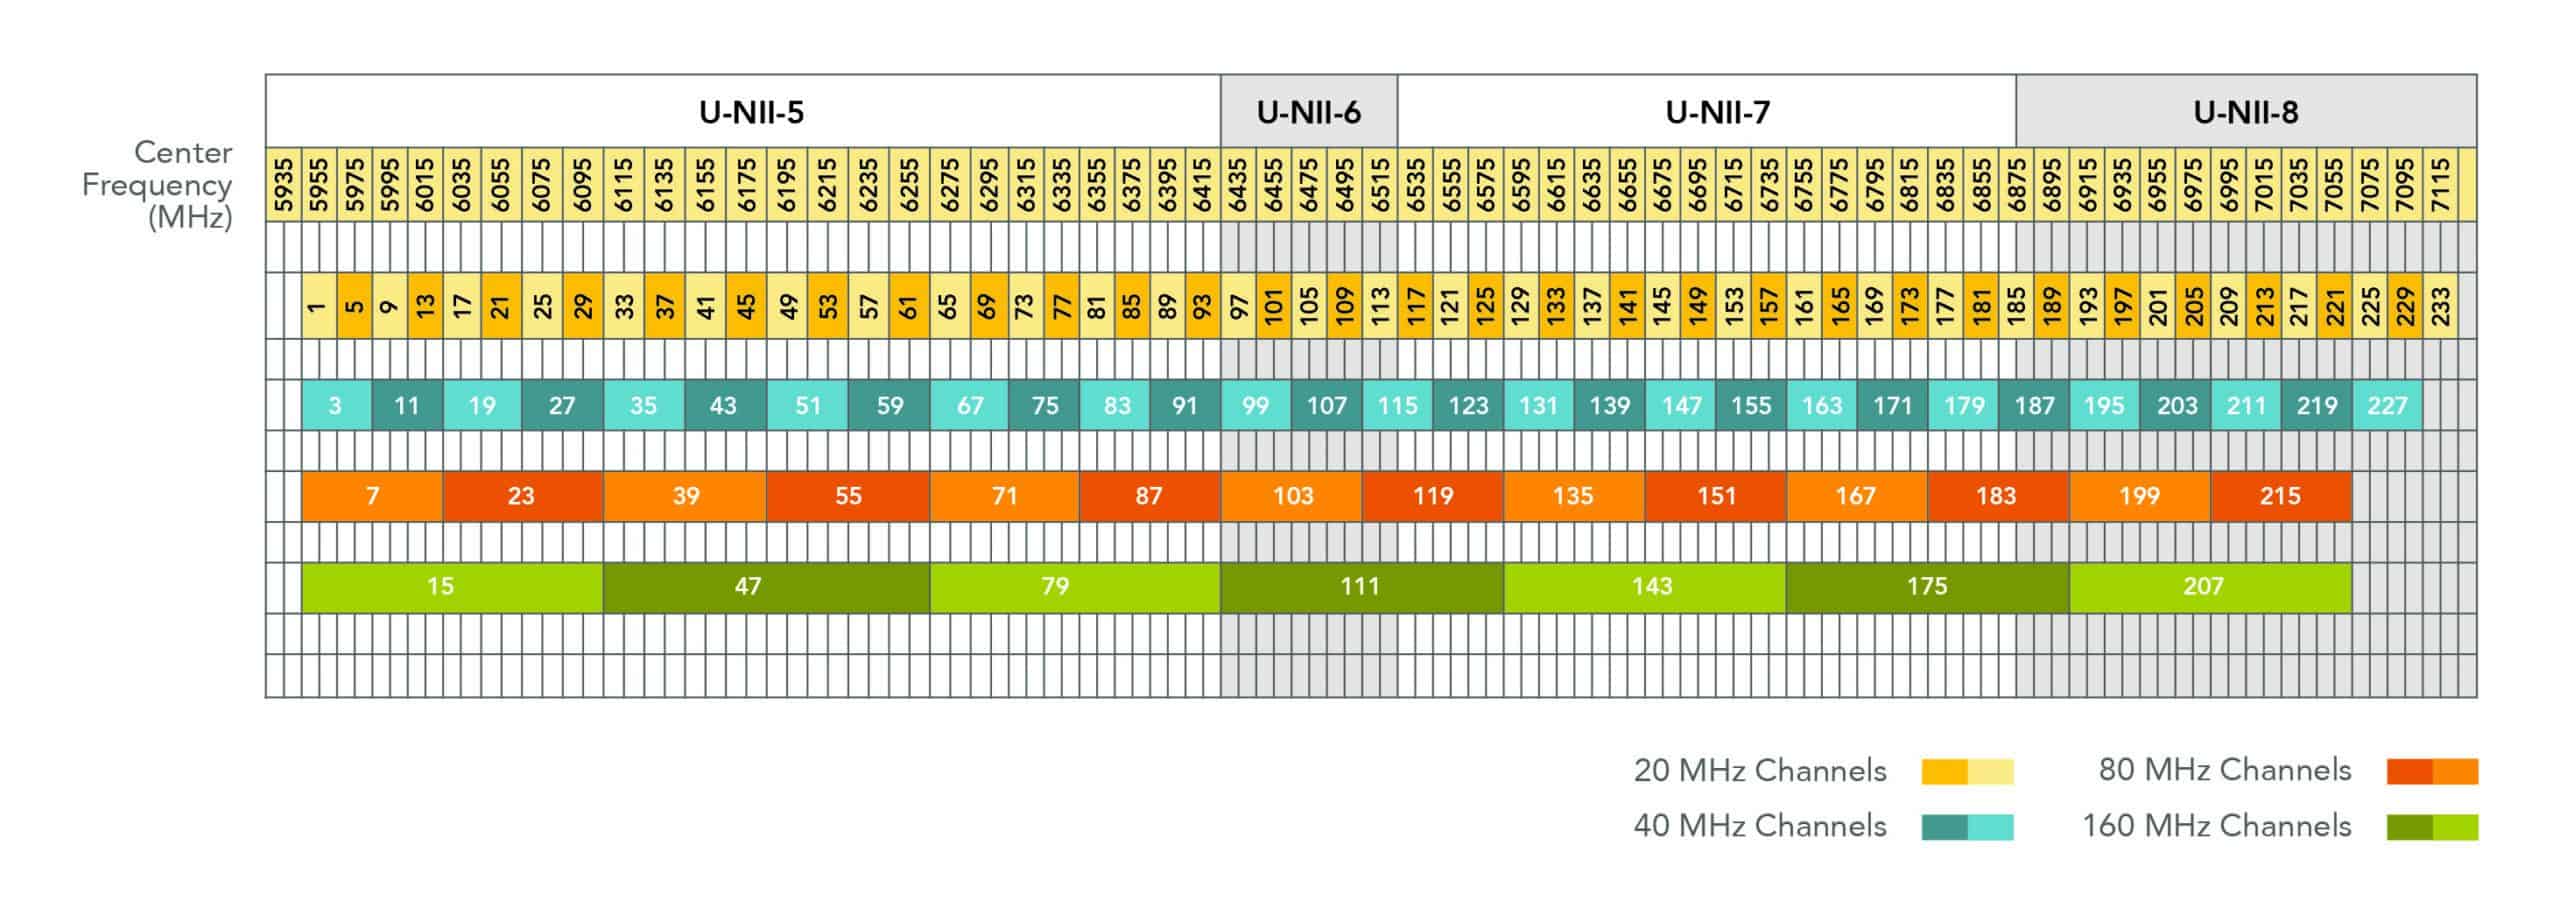 What are the 6g channels for WiFi?